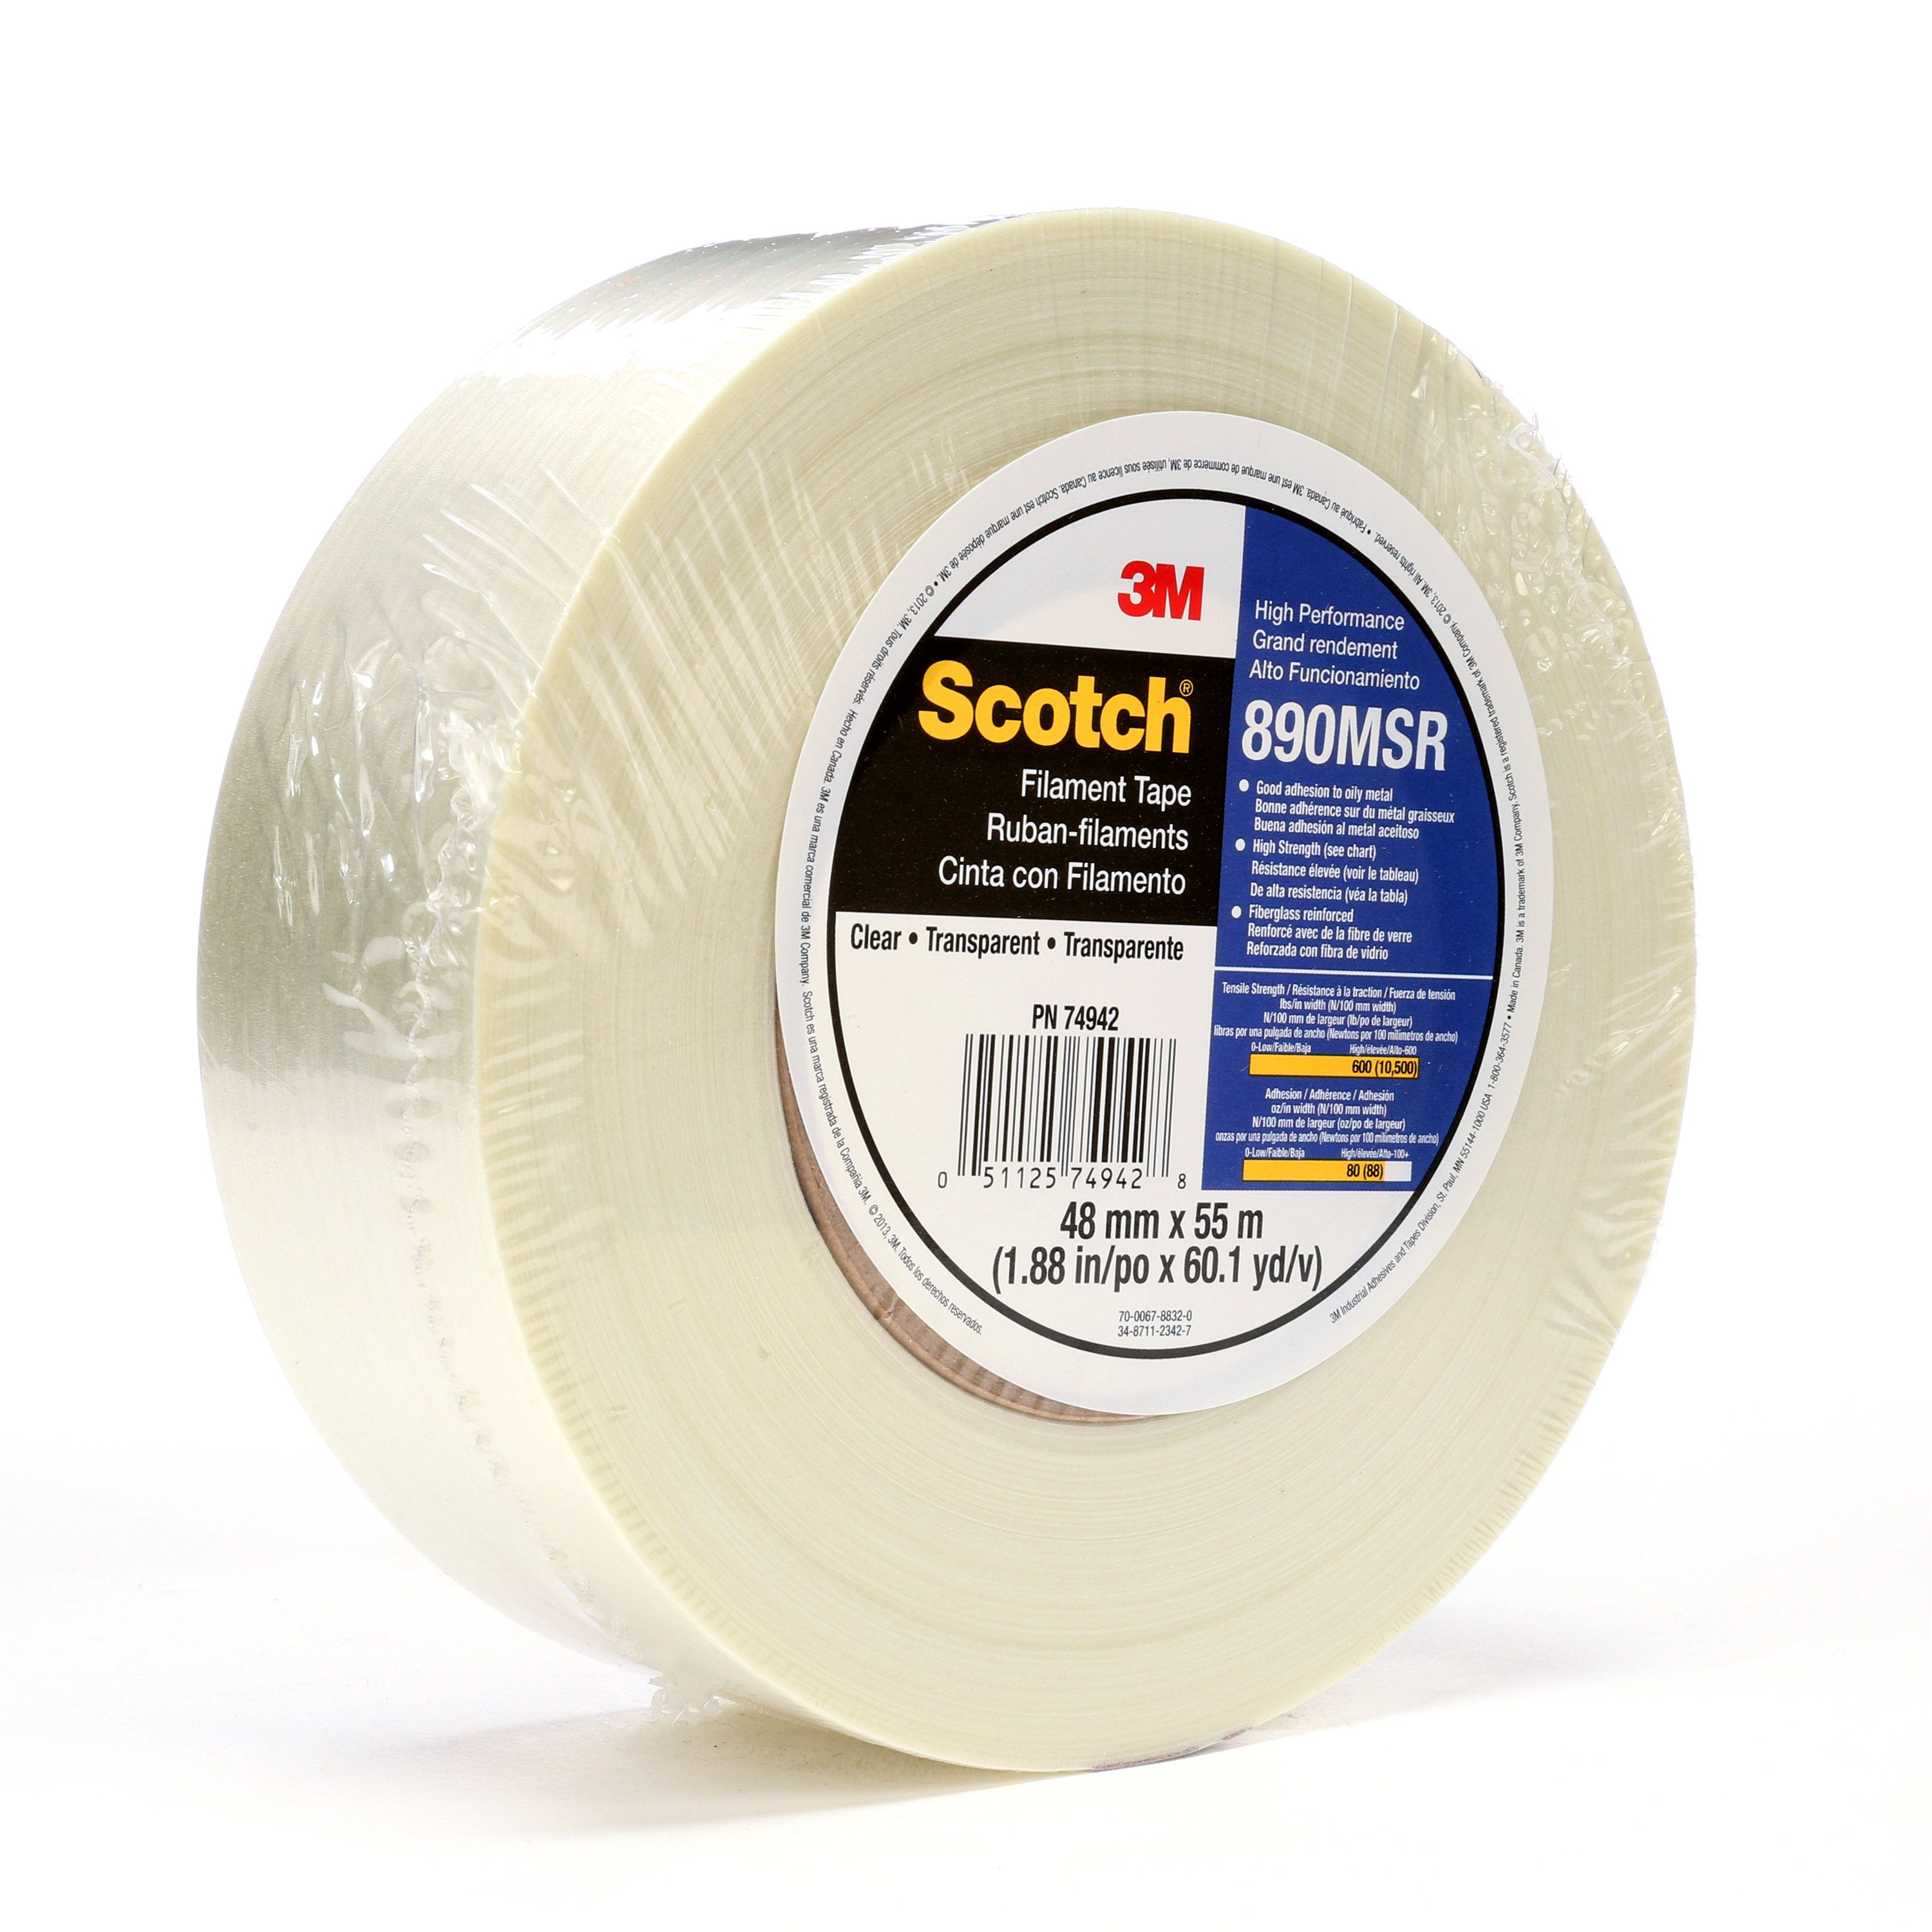 Scotch® Filament Tape 890MSR is an industrial-strength tape used in a variety of metalworking applications.